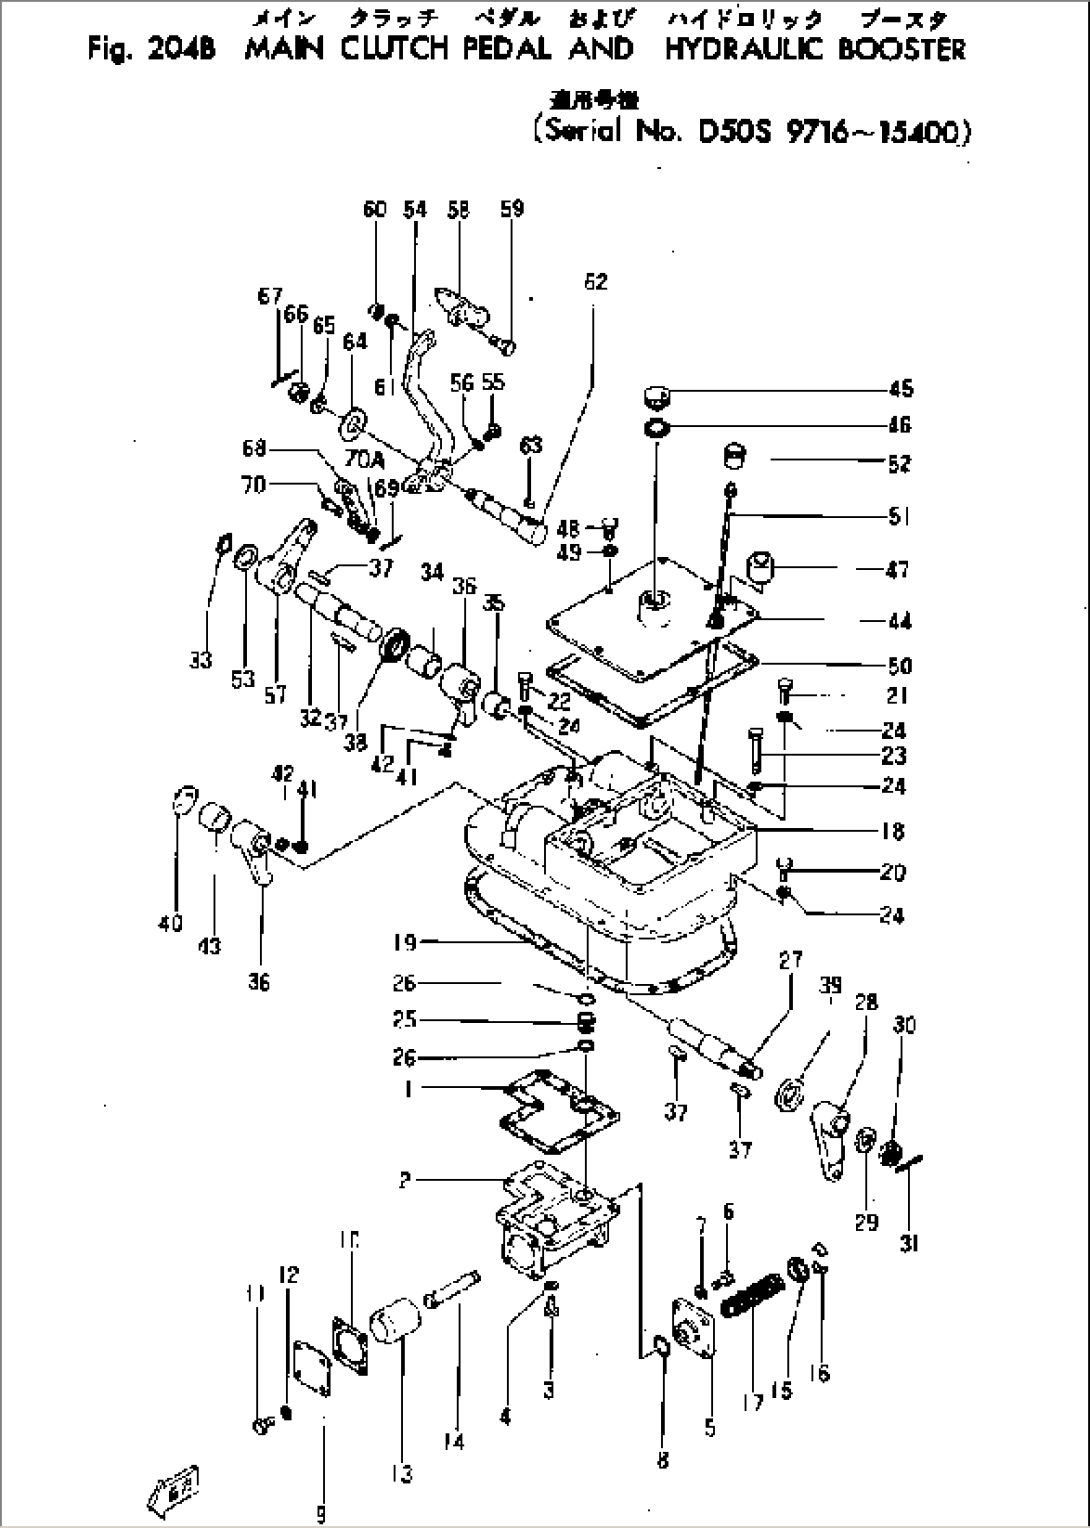 MAIN CLUTCH PEDAL AND HYDRAULIC BOOSTER(#9716-)